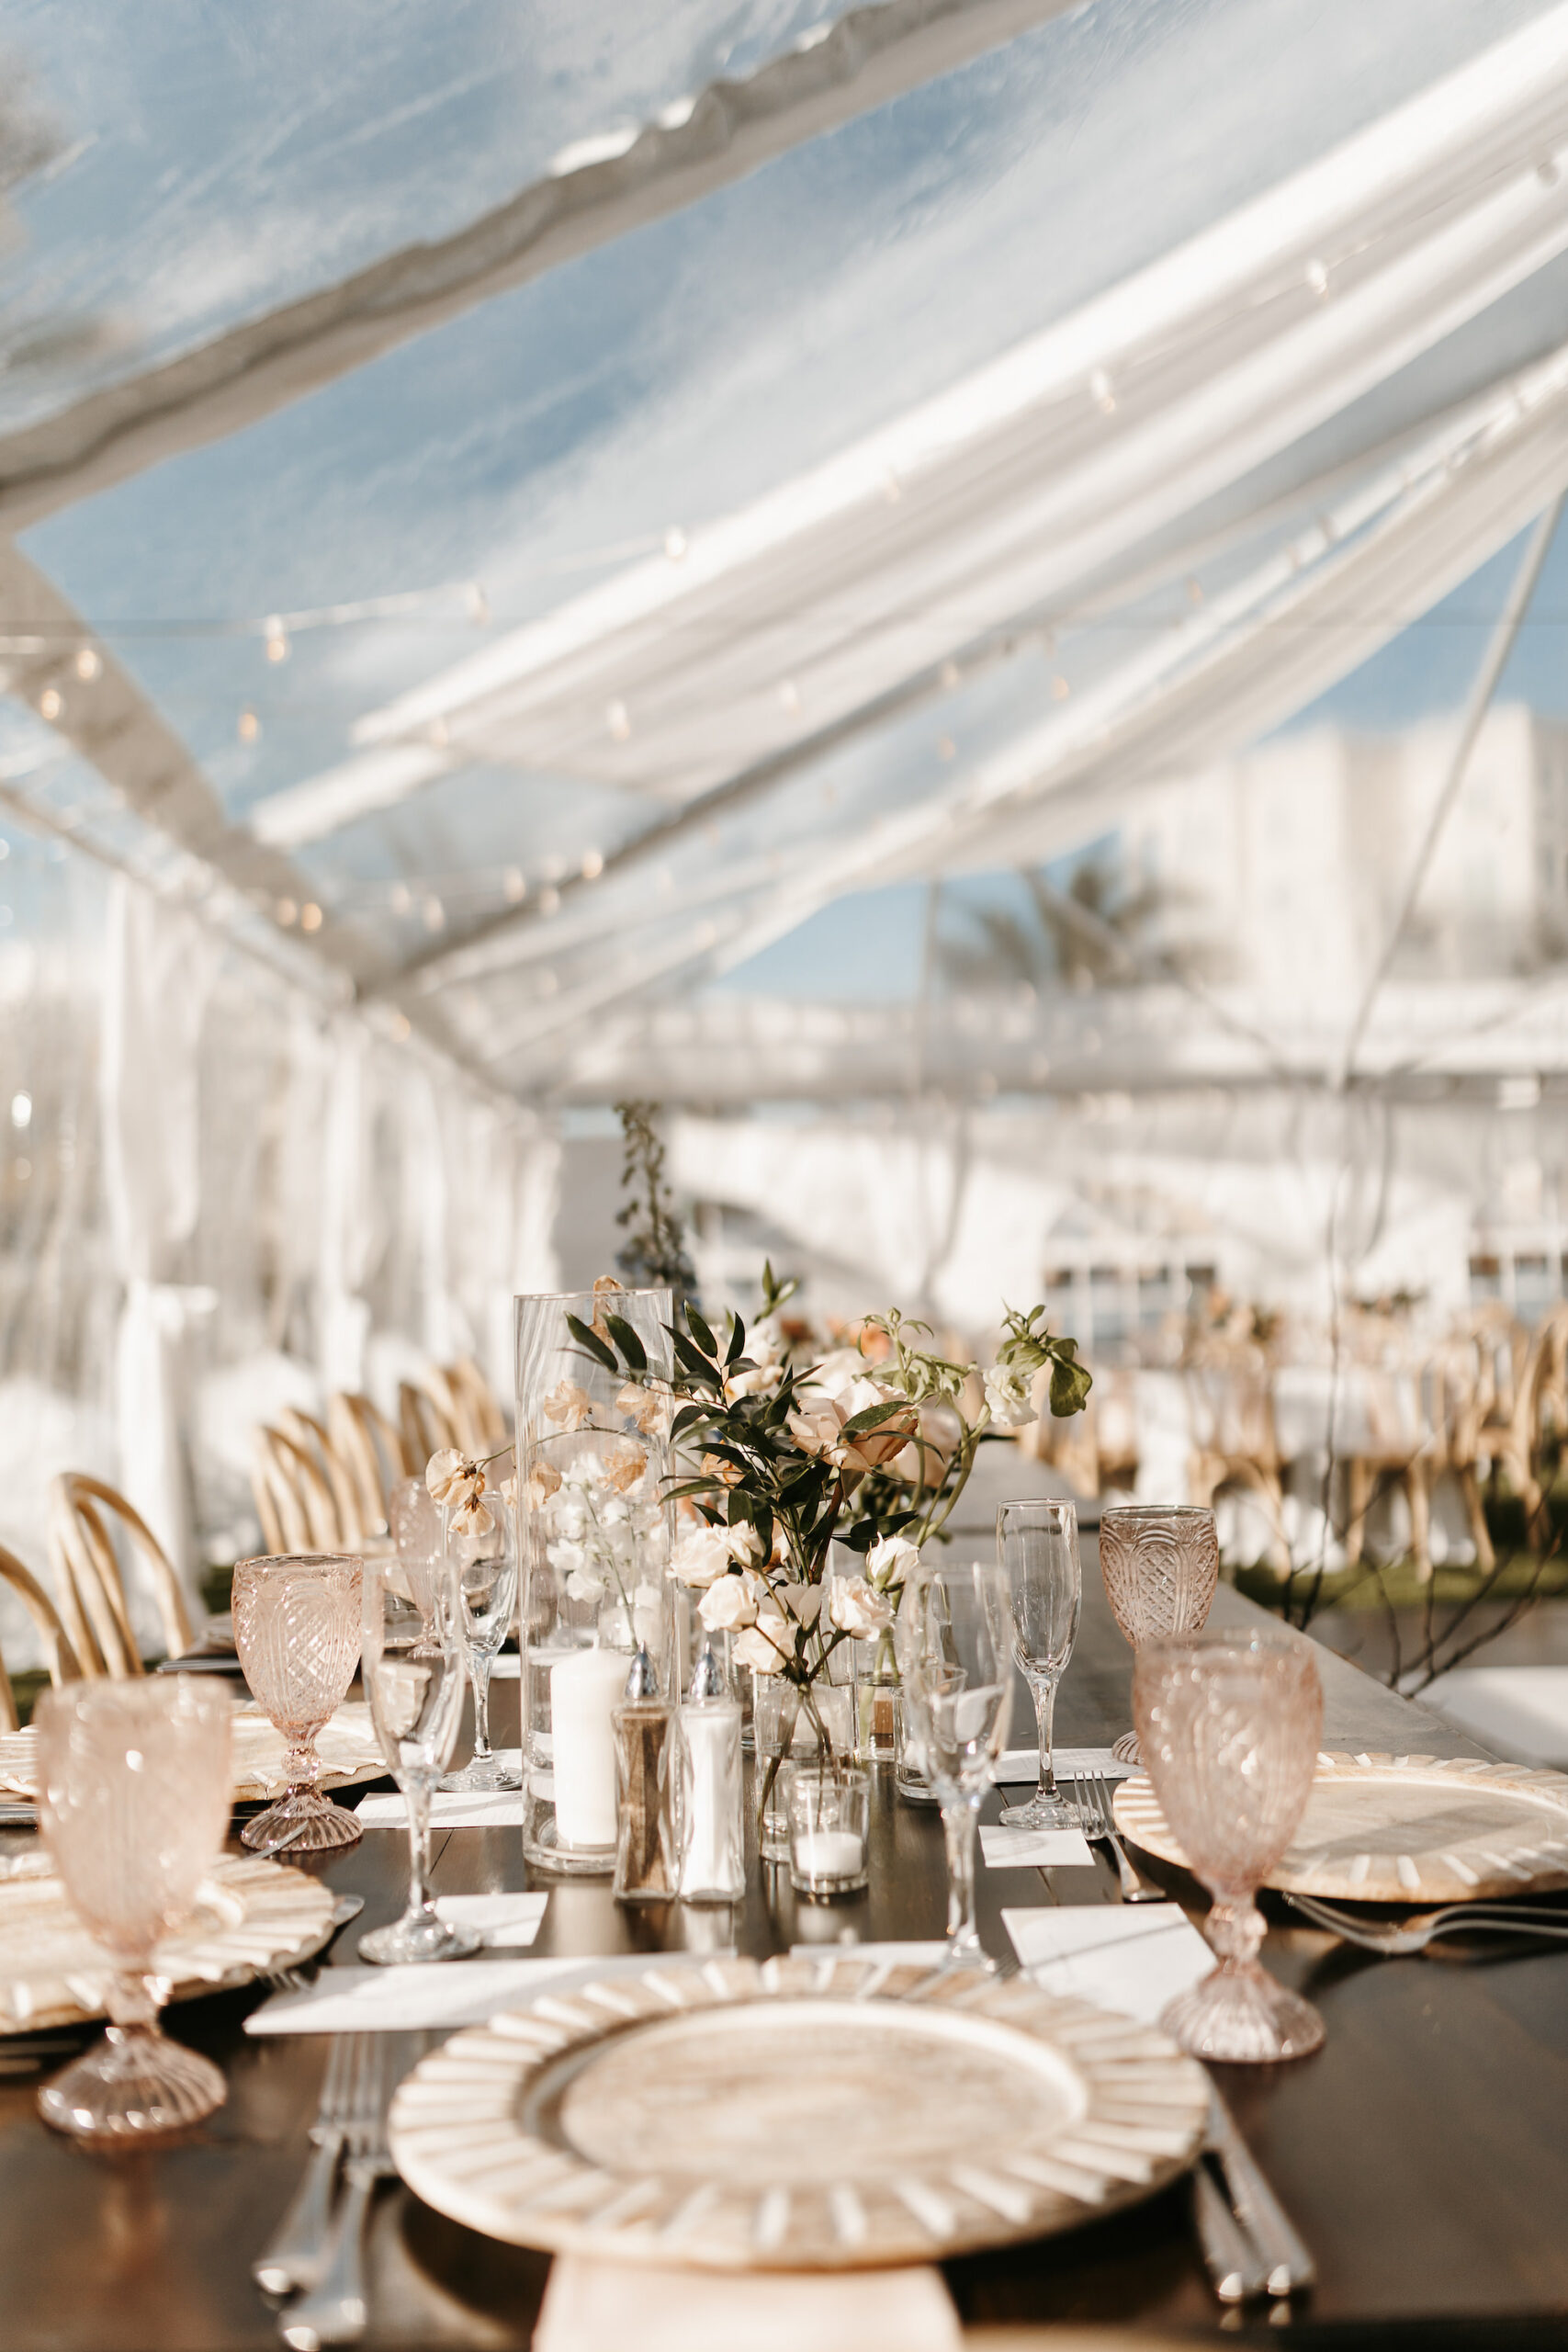 Classic Wedding Reception Table Decor Centerpiece | Blush Pink Goblets | Wooden Chargers | Tablescape Inspiration